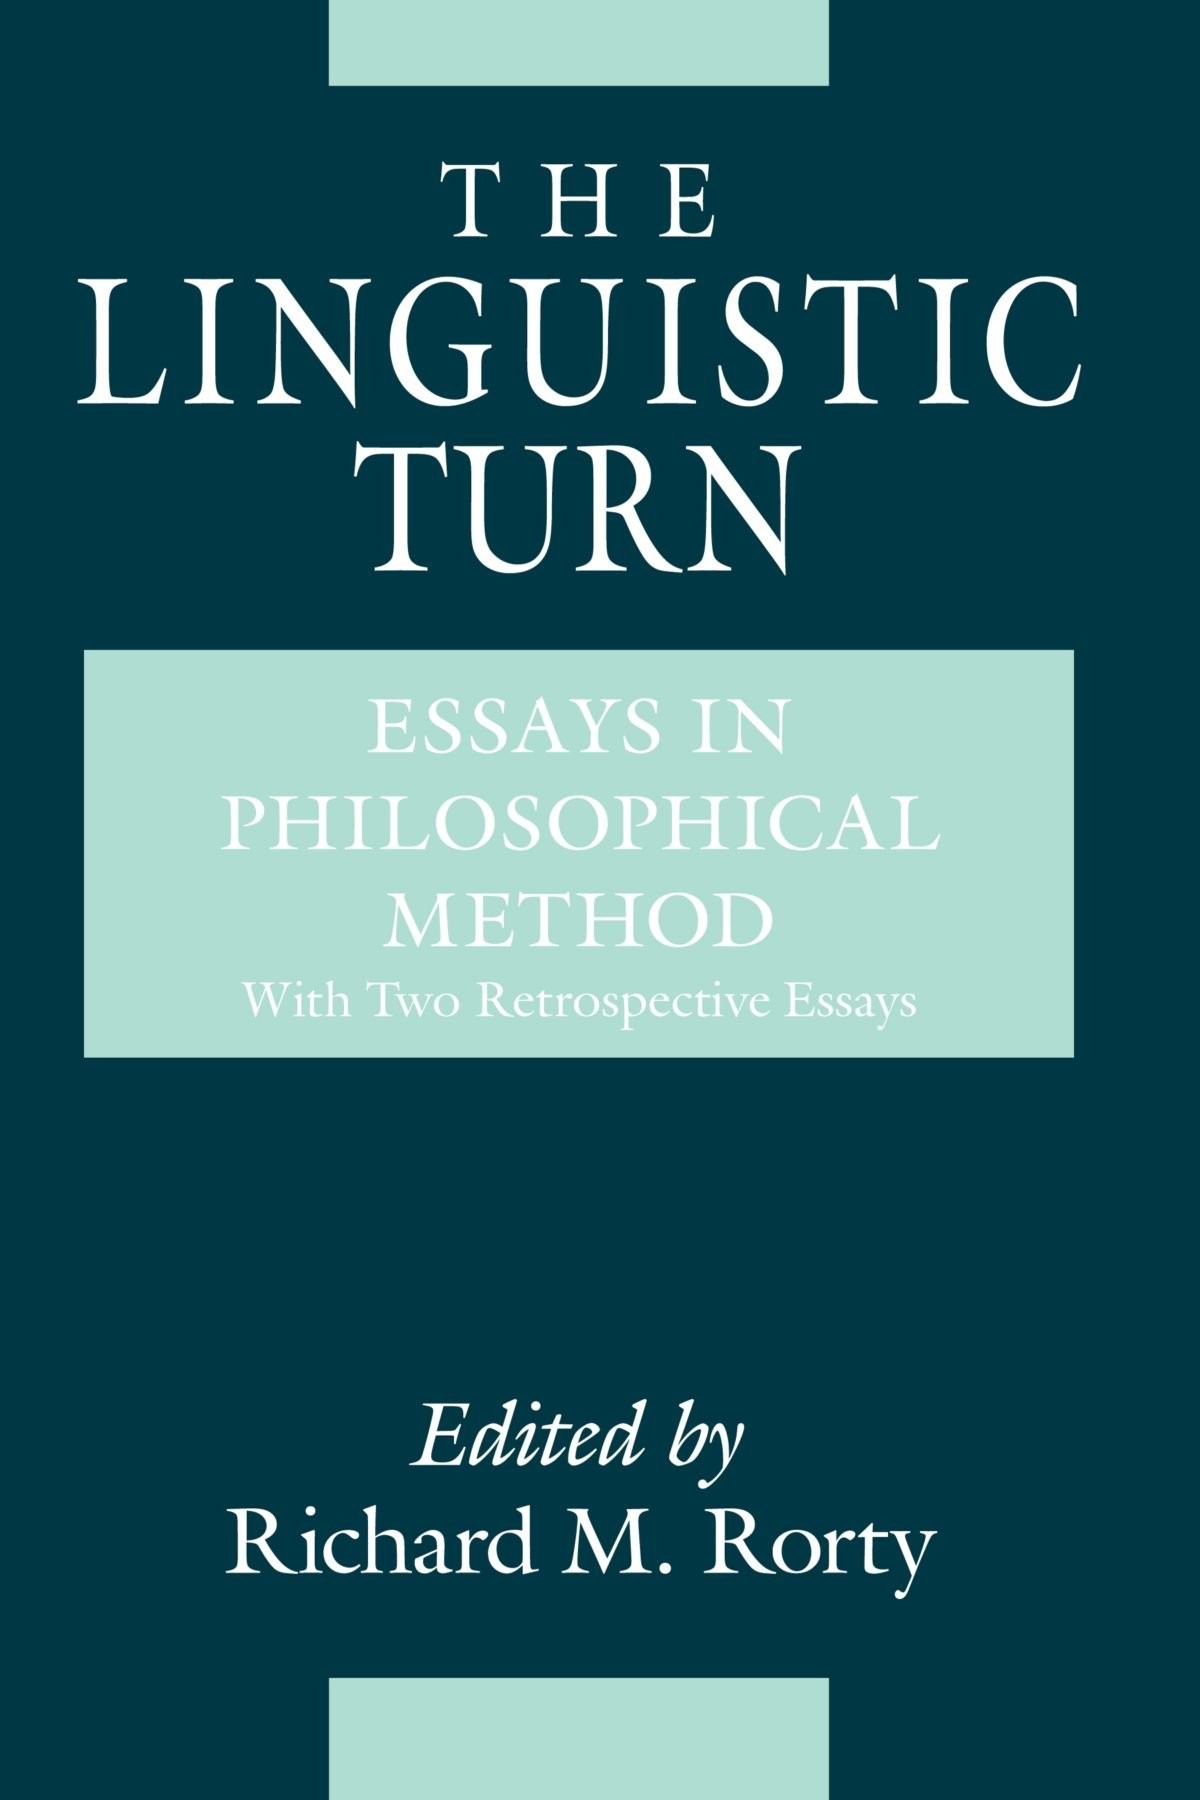 The Linguistic Turn: Essays in Philosophical Method